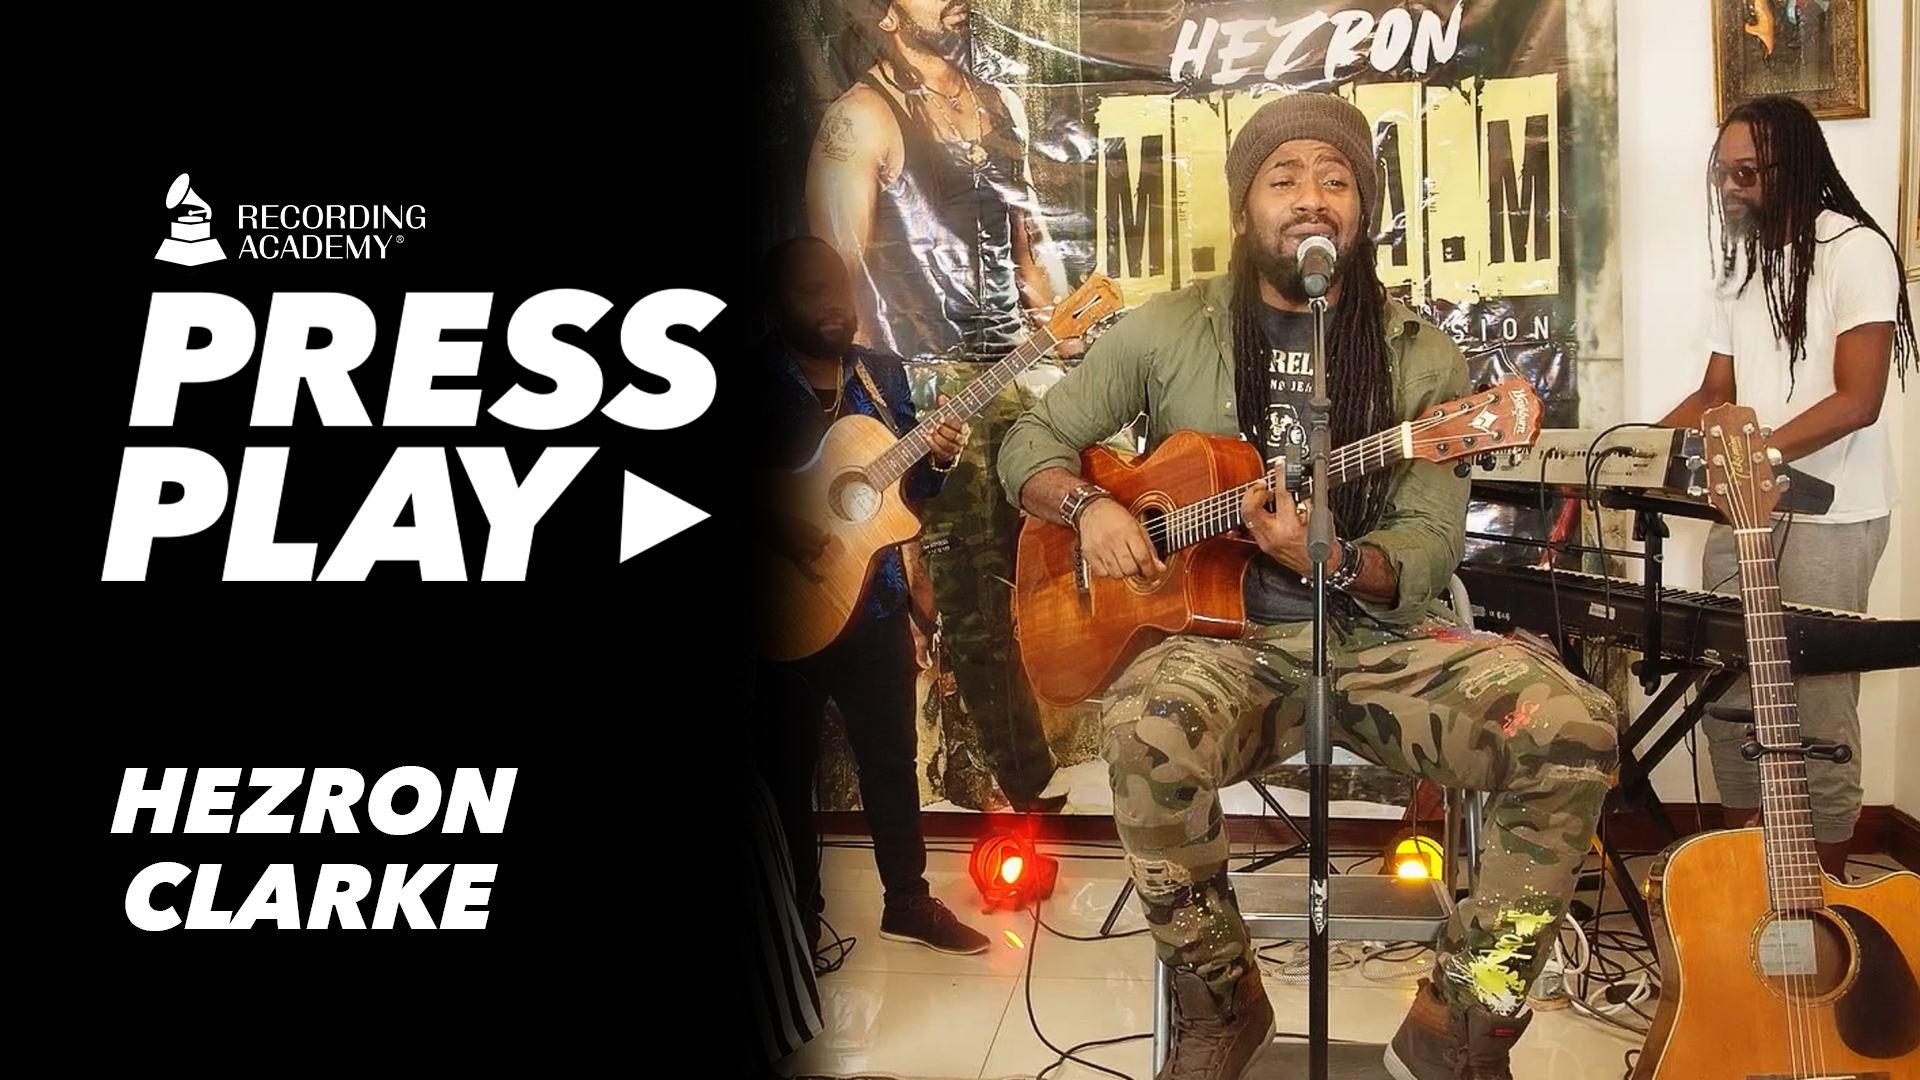 Watch Hezron Clarke Perform "Man On A Mission"